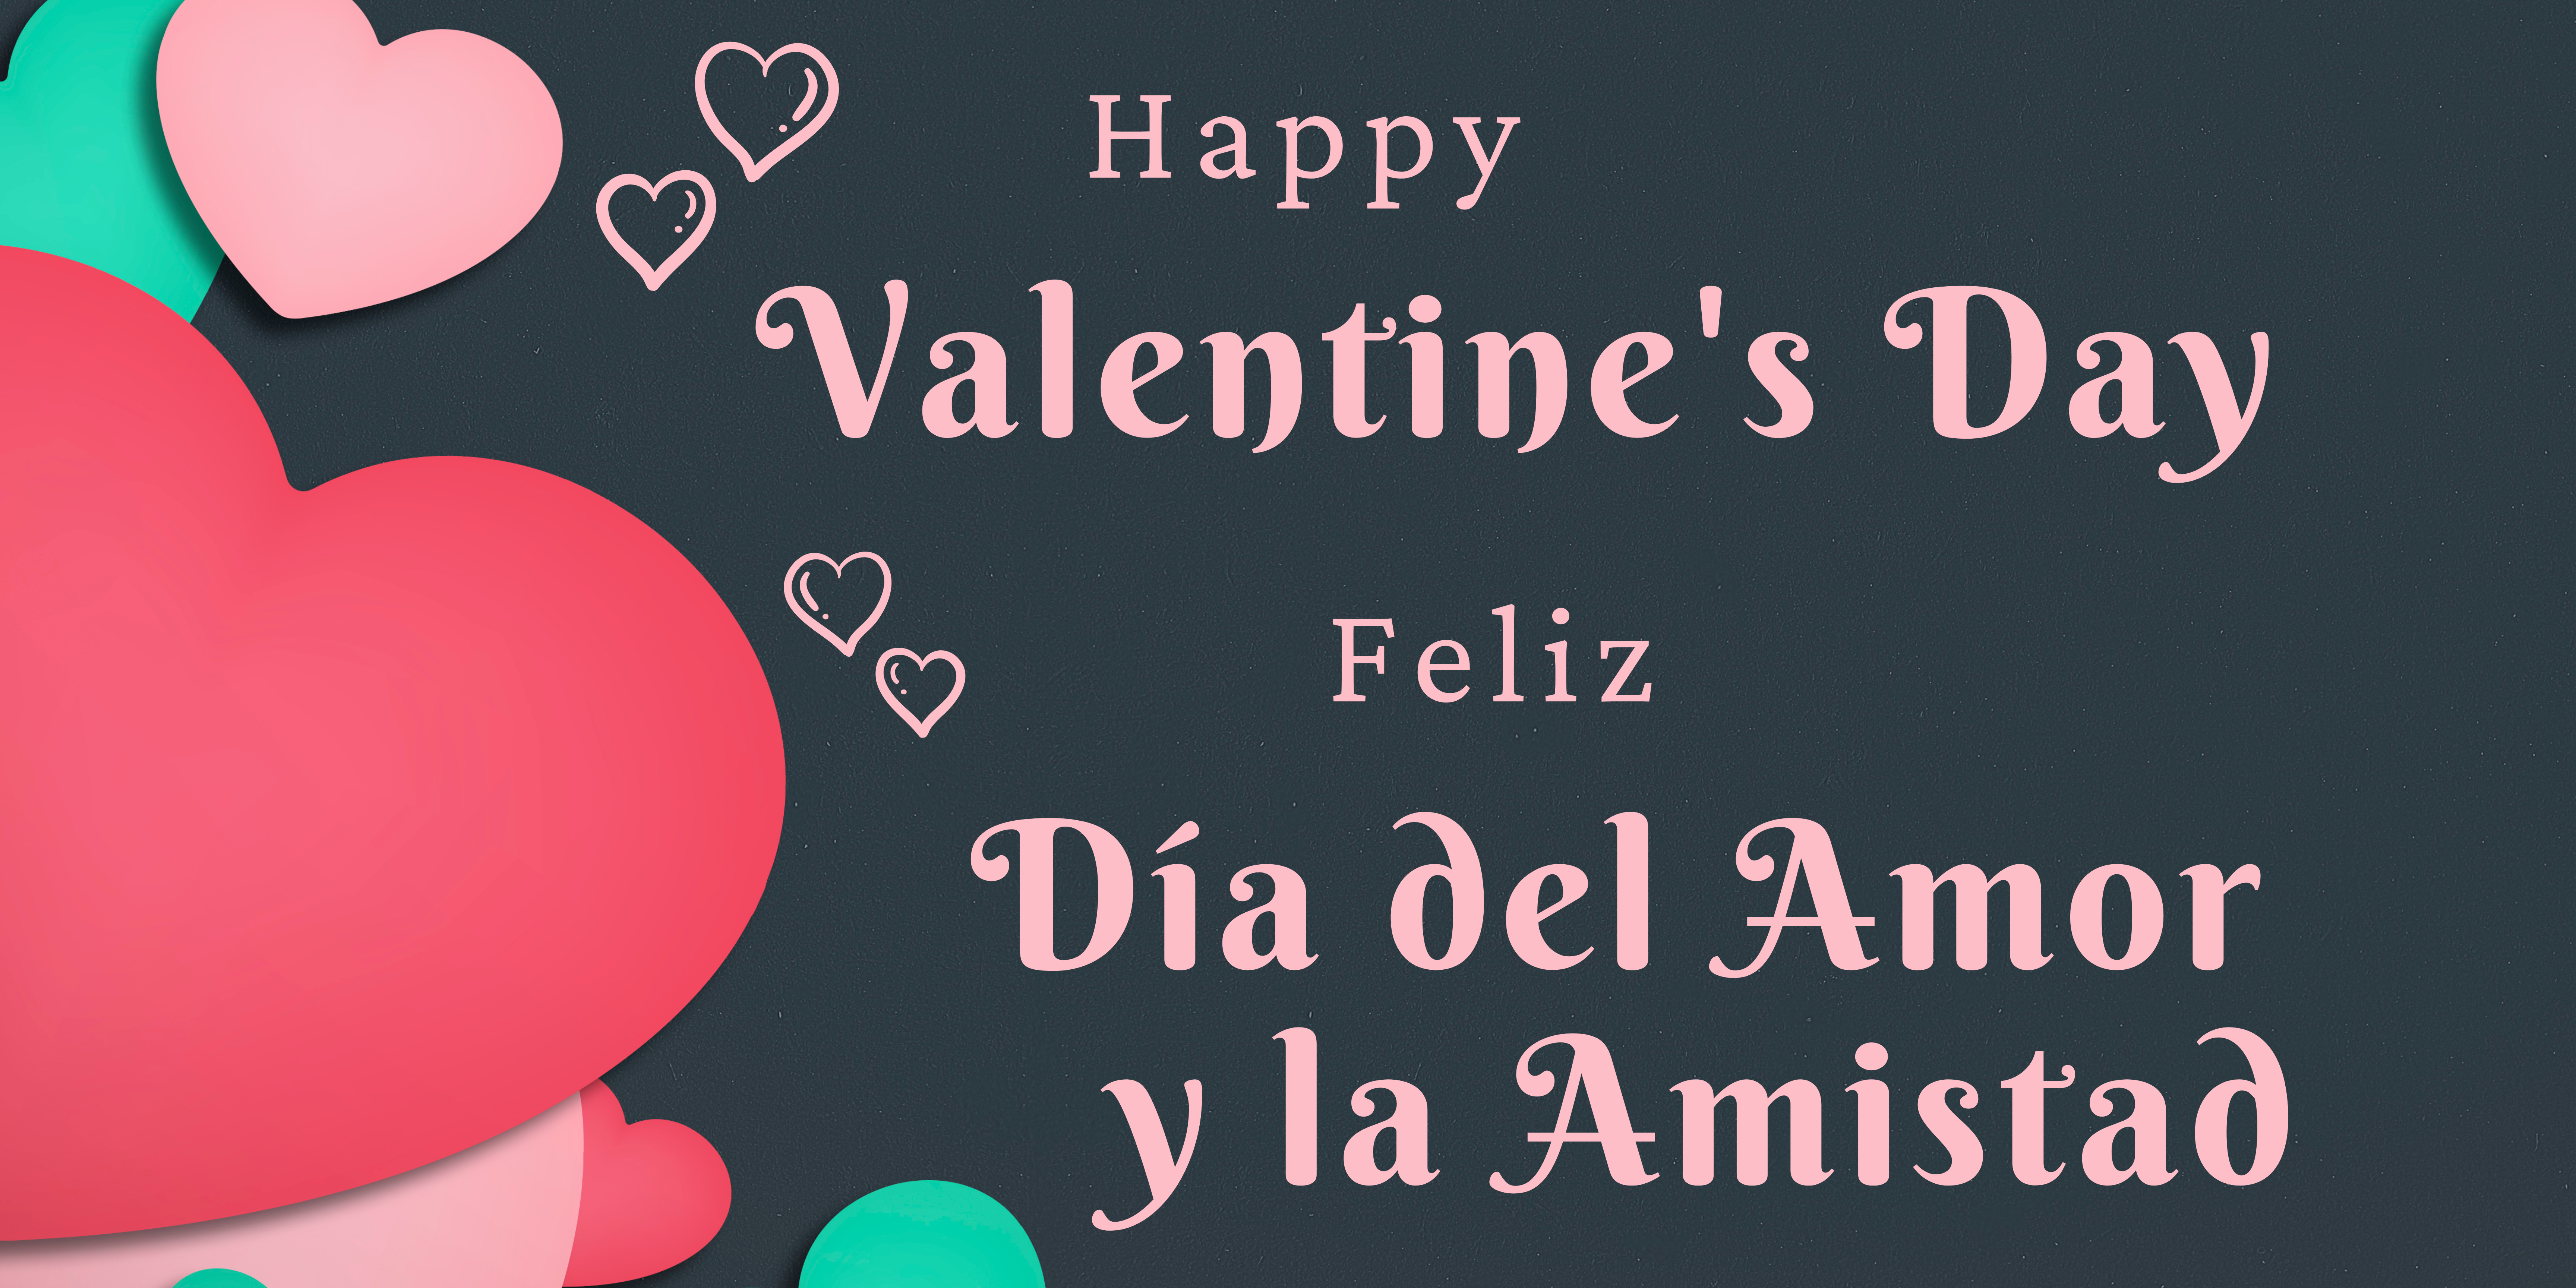 Black background with red, pink, and green hearts on left side. Pink text says "Happy Valentine's Day" and "Día del Amor y la Amistad"